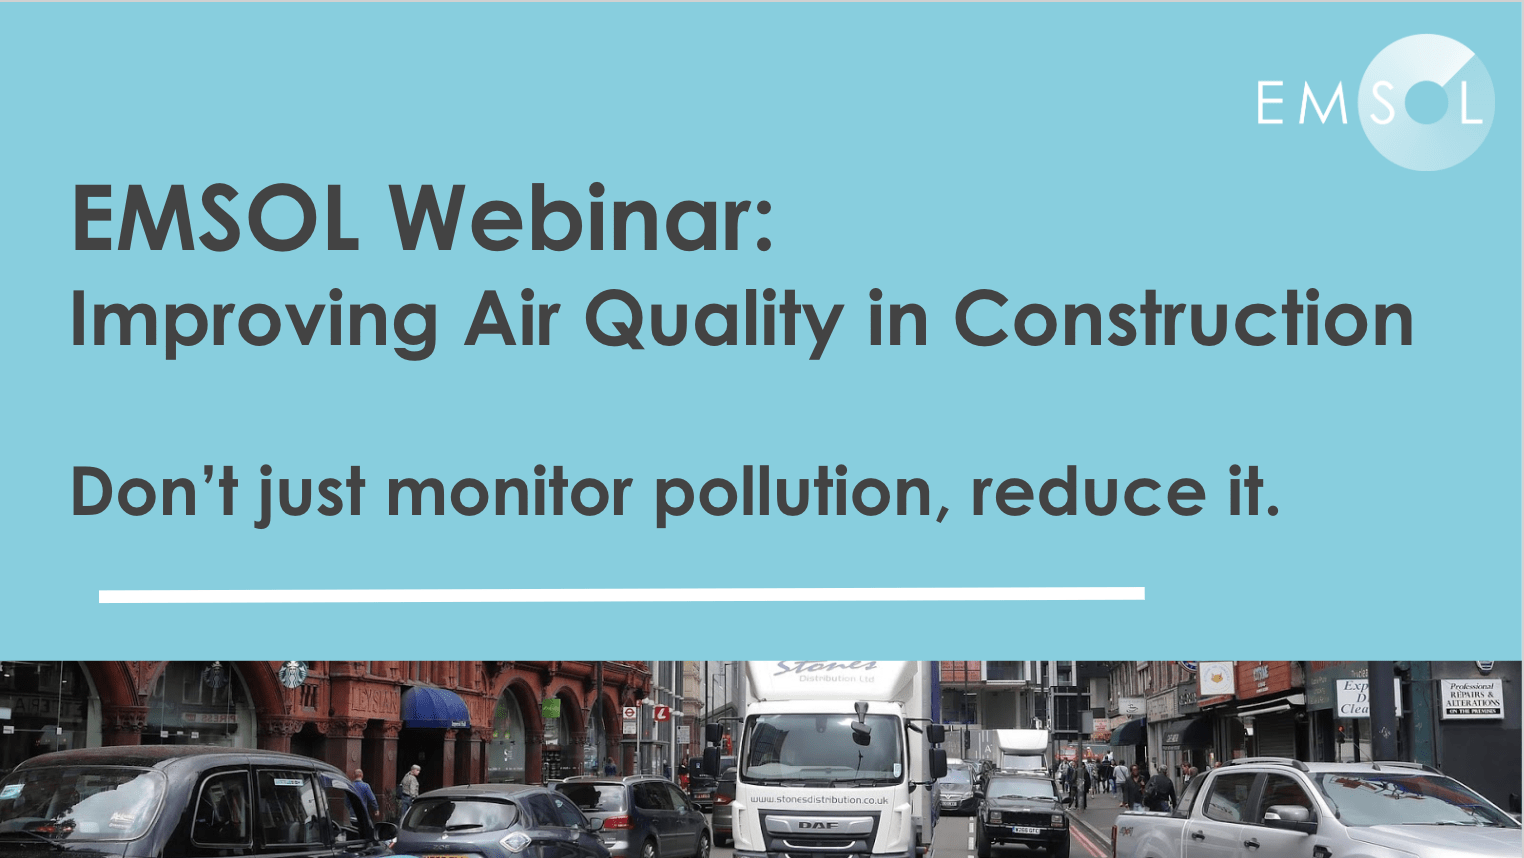 Webinar on-demand: Improving Air Quality in Construction